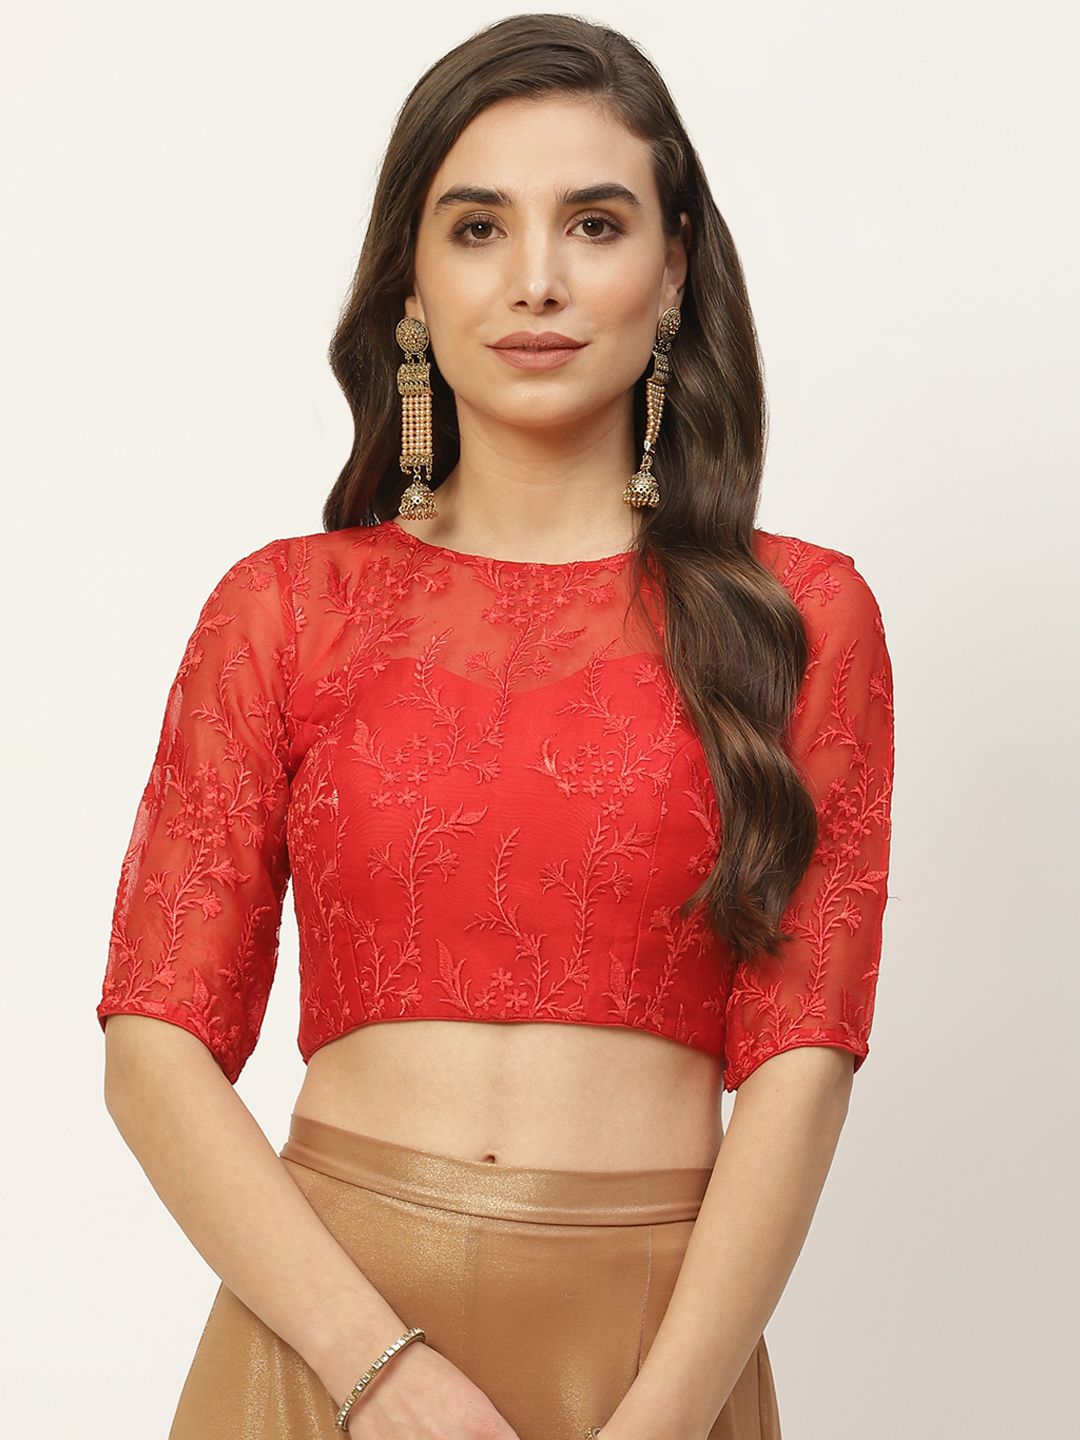 NDS Niharikaa Designer Studio Women Red Embroidered Padded Saree Blouse Price in India